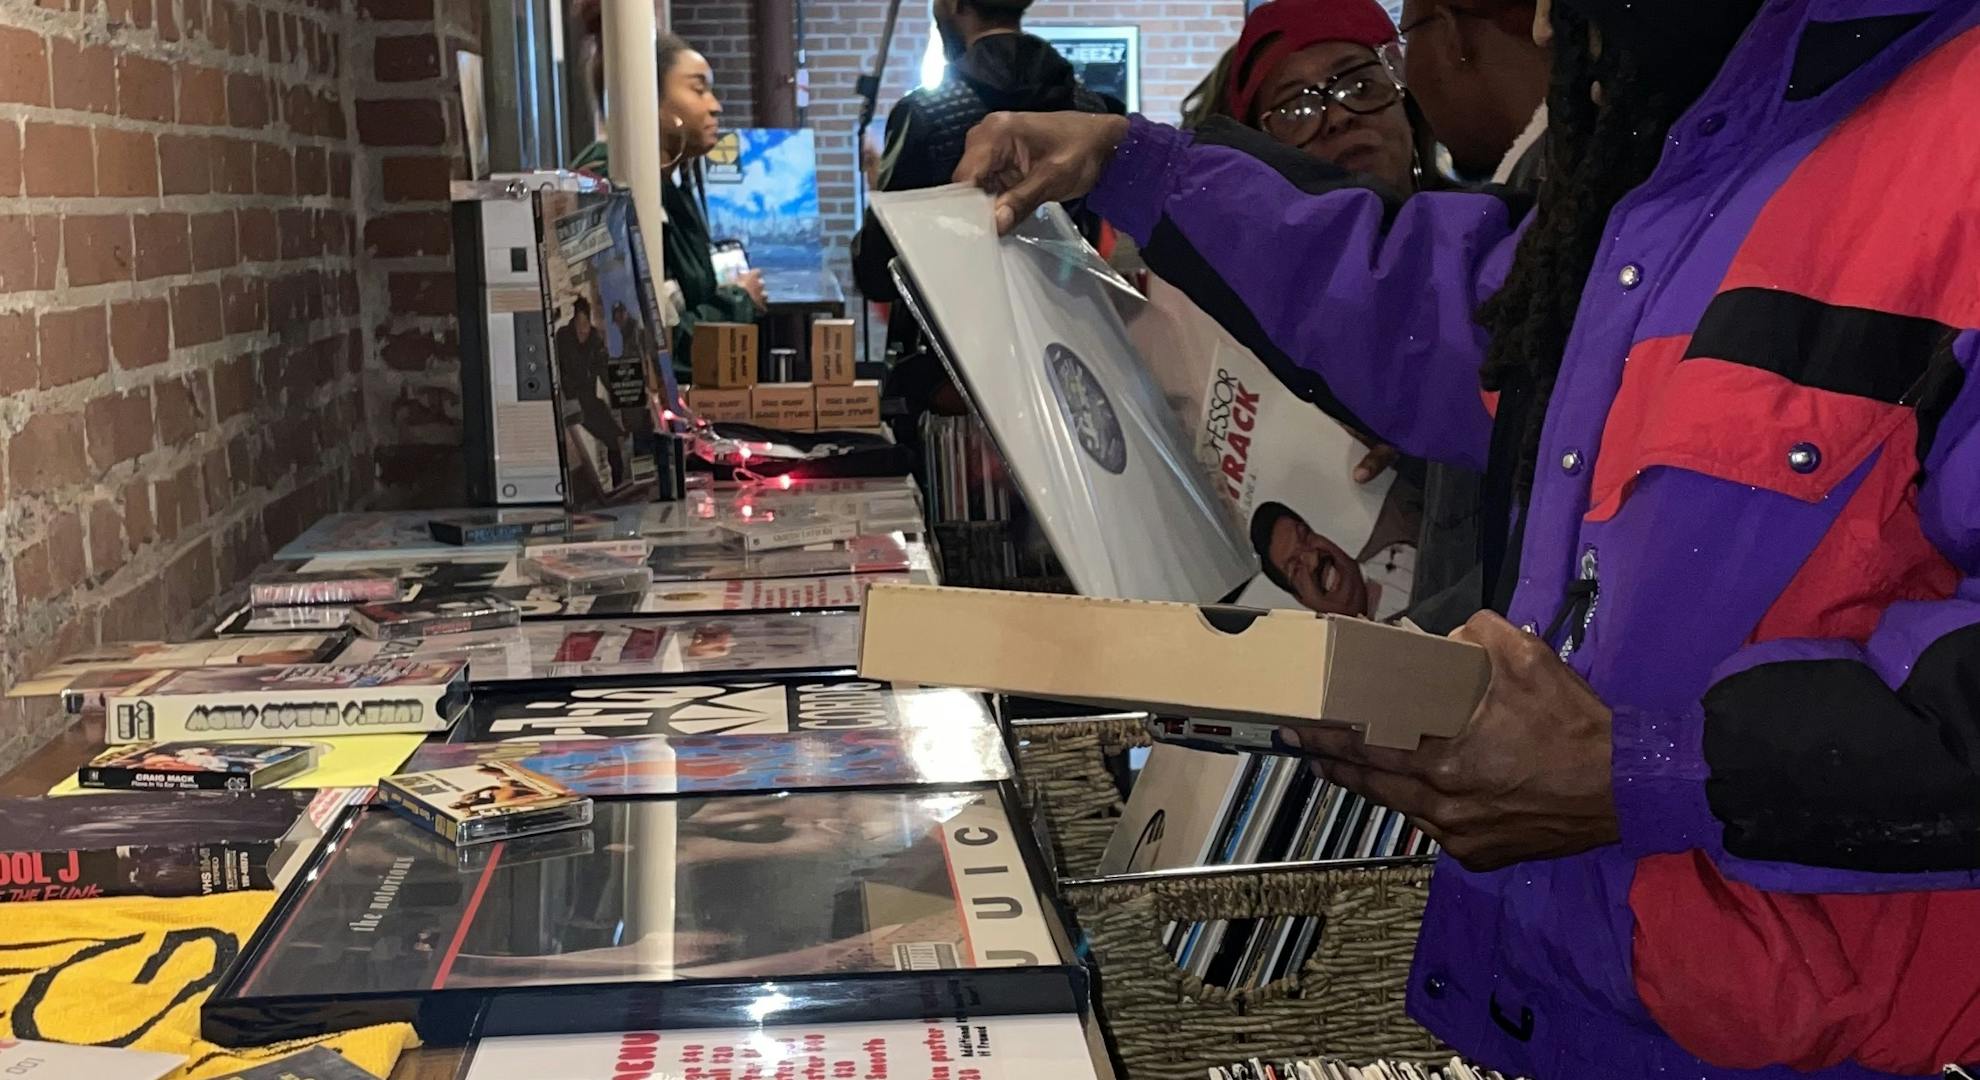 Attendees peruse the vinyl at Rock The Bells' Remember The Rhyme event in Atlanta